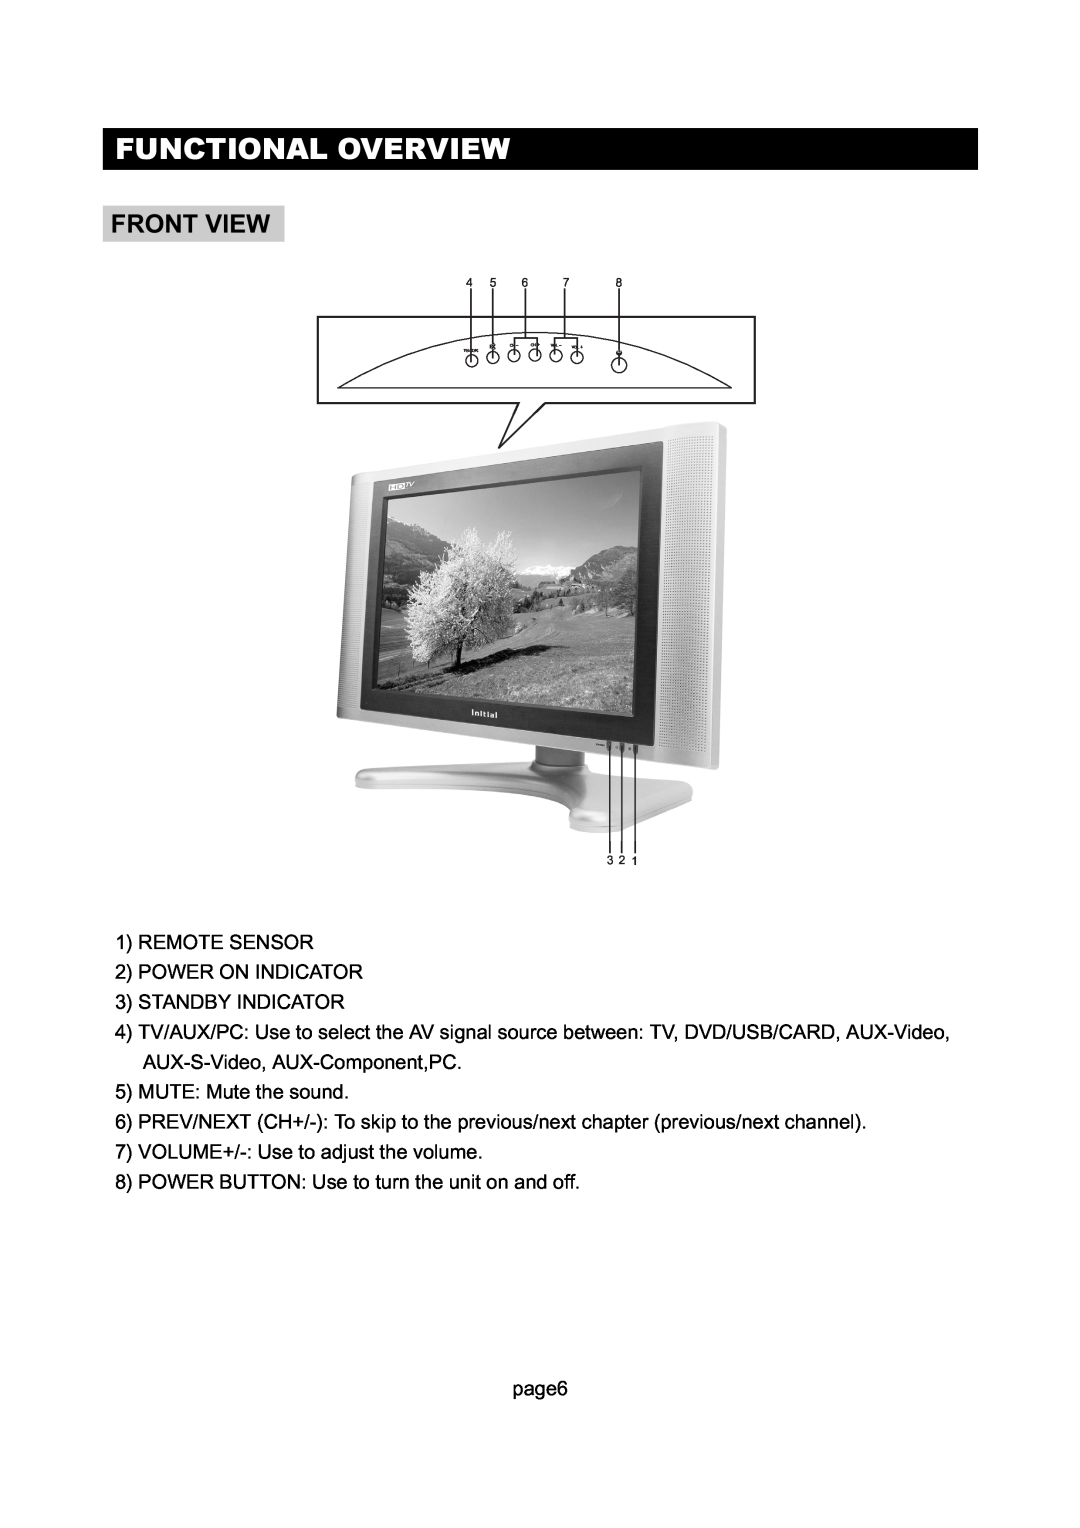 Initial DTV-172A manual Functional Overview, Front View 